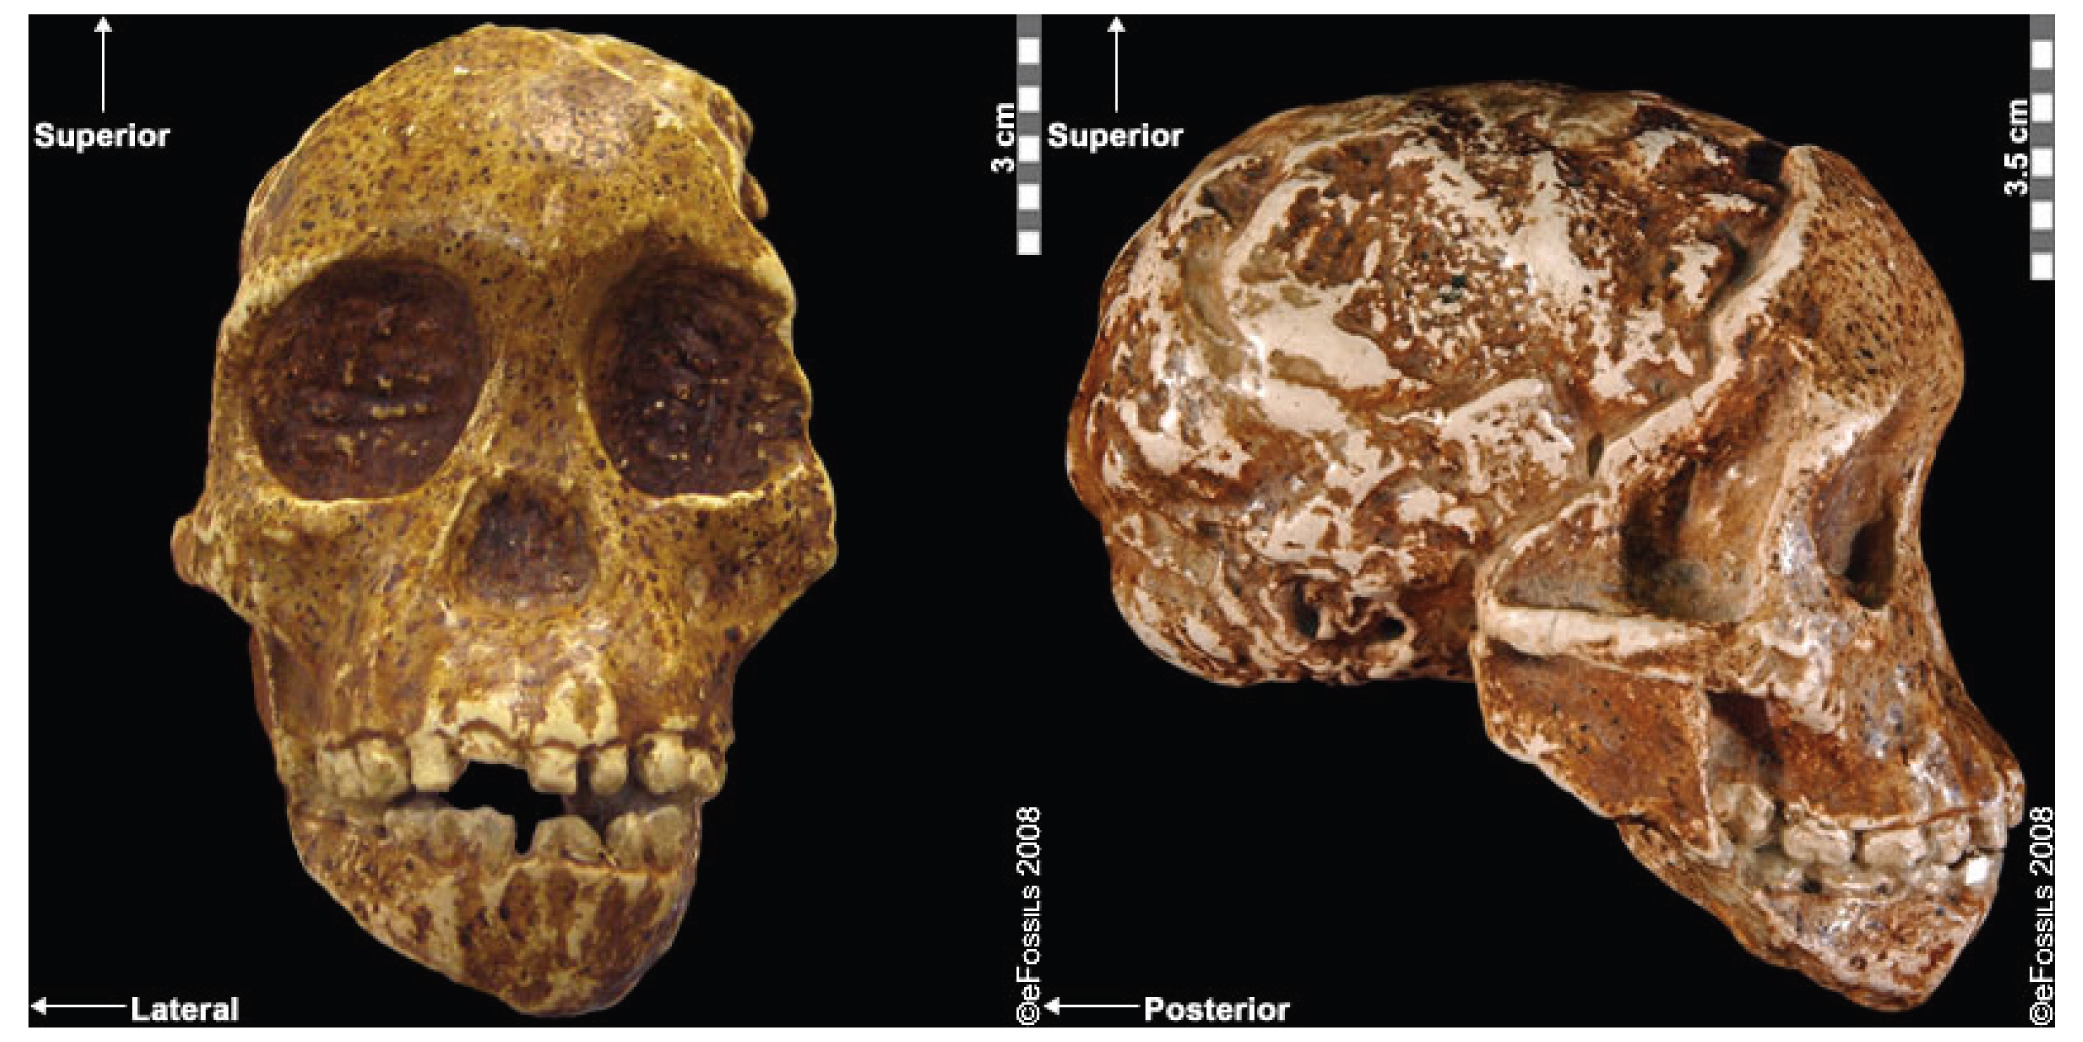 An ancient skull in anterior and lateral views. One view shows an imprint of the brain.